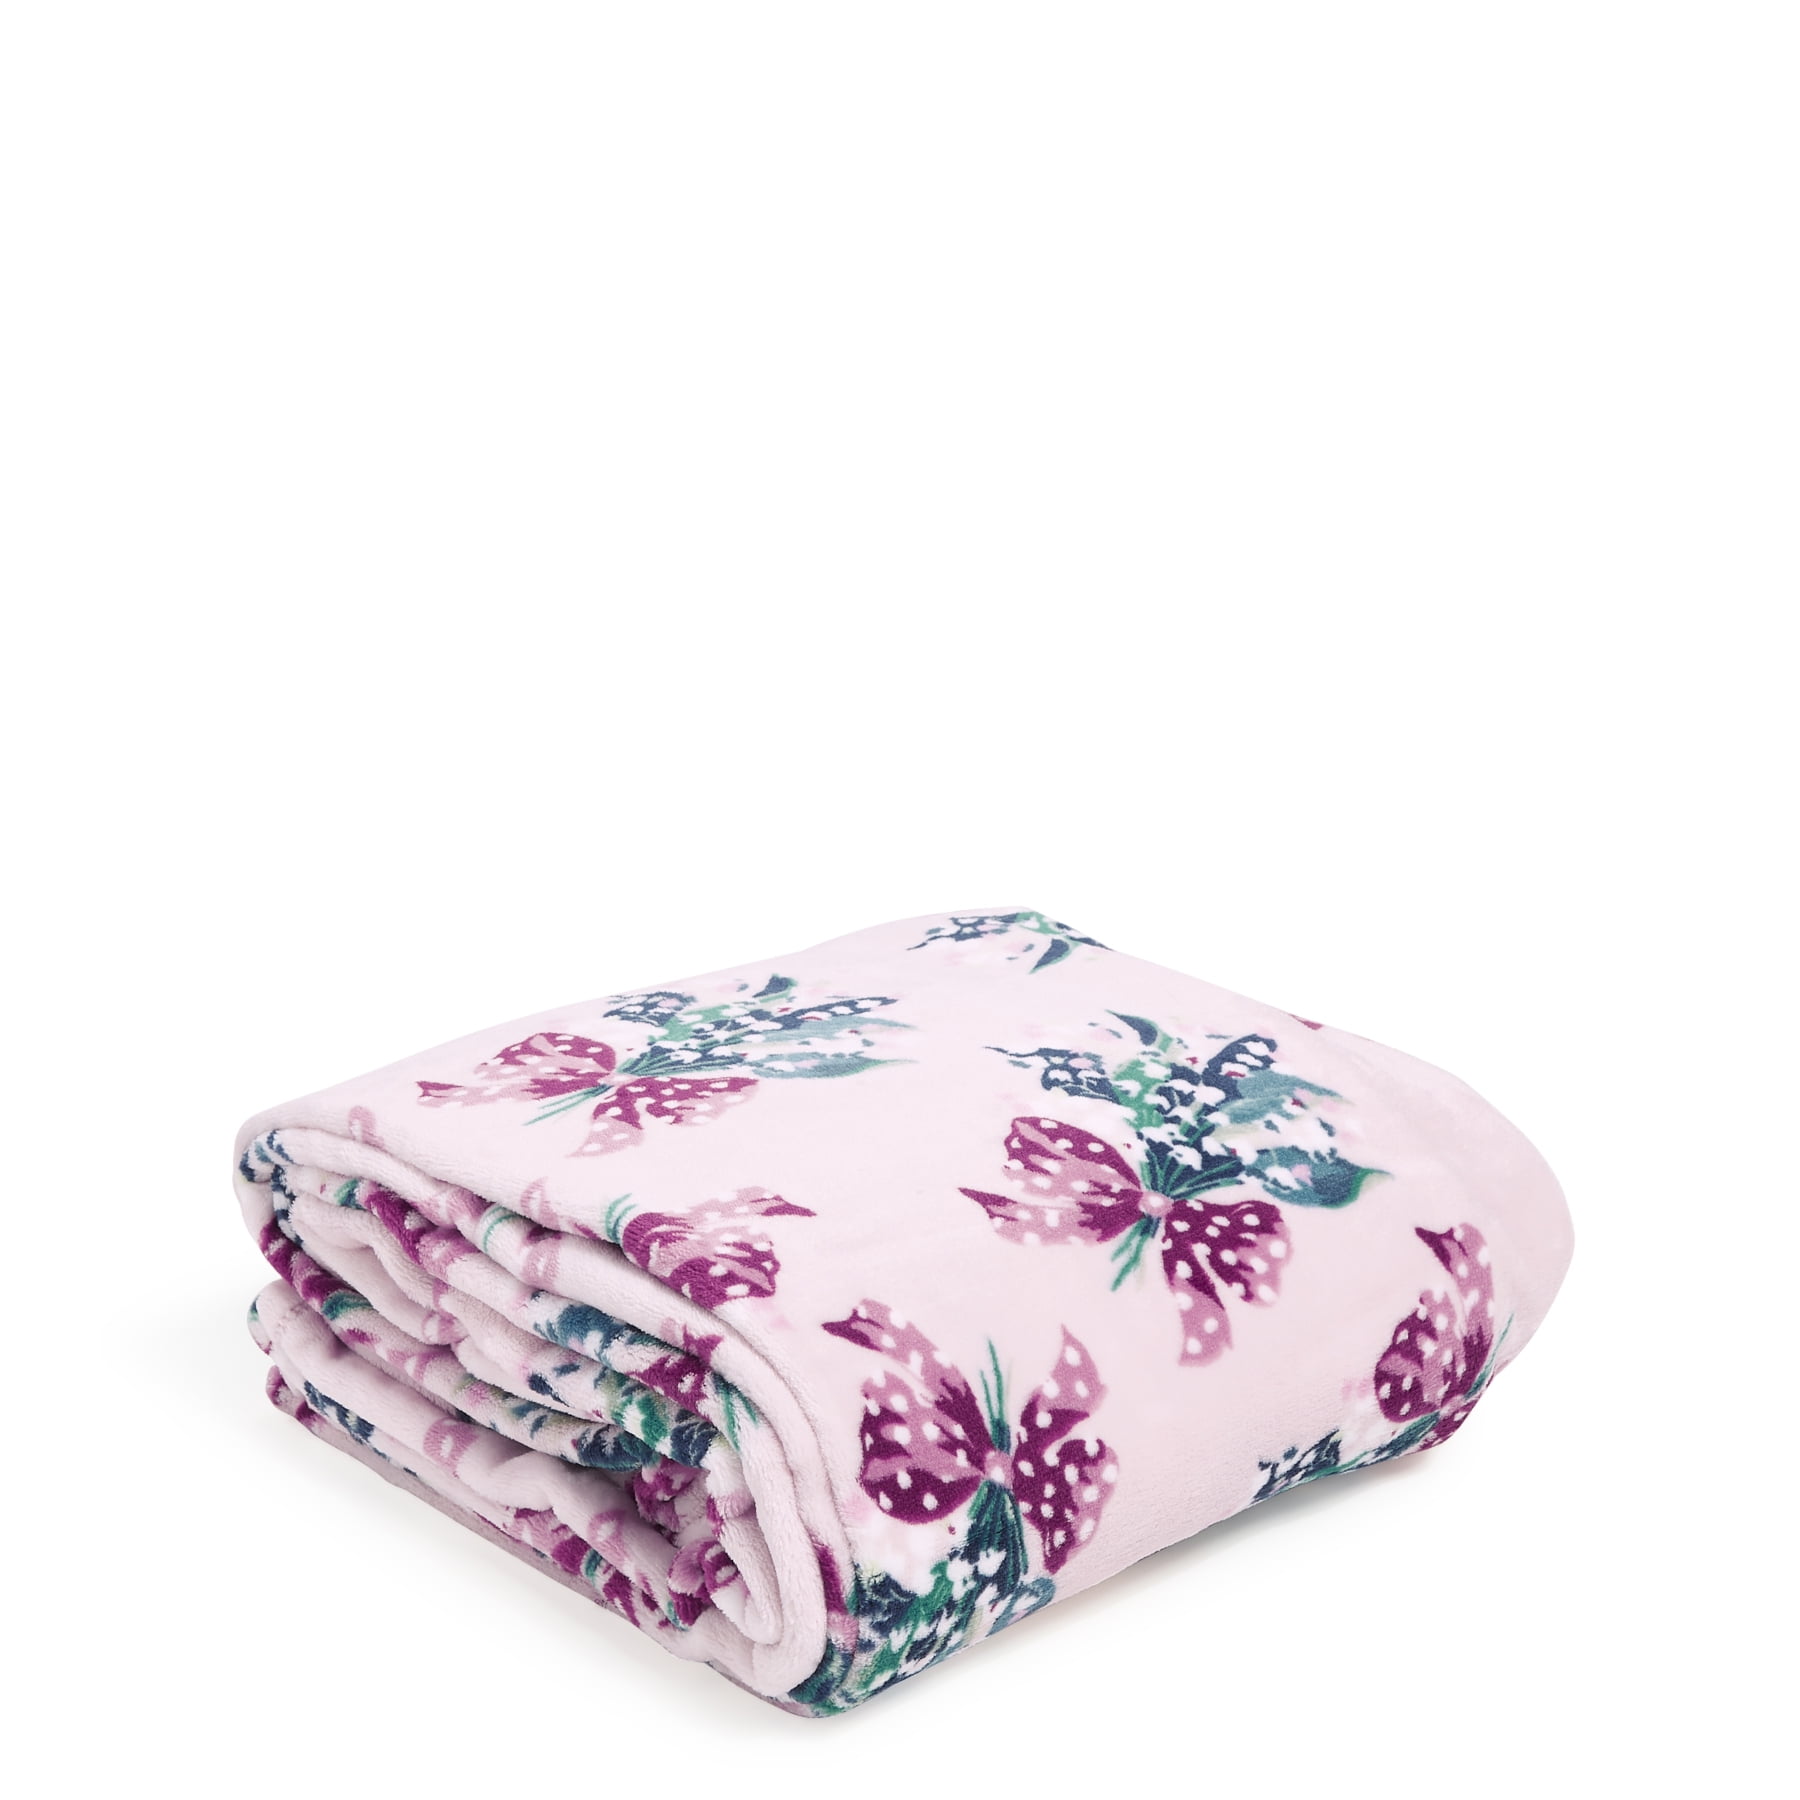 Vera Bradley Plush Throw Blanket in Blooms and Branches Navy